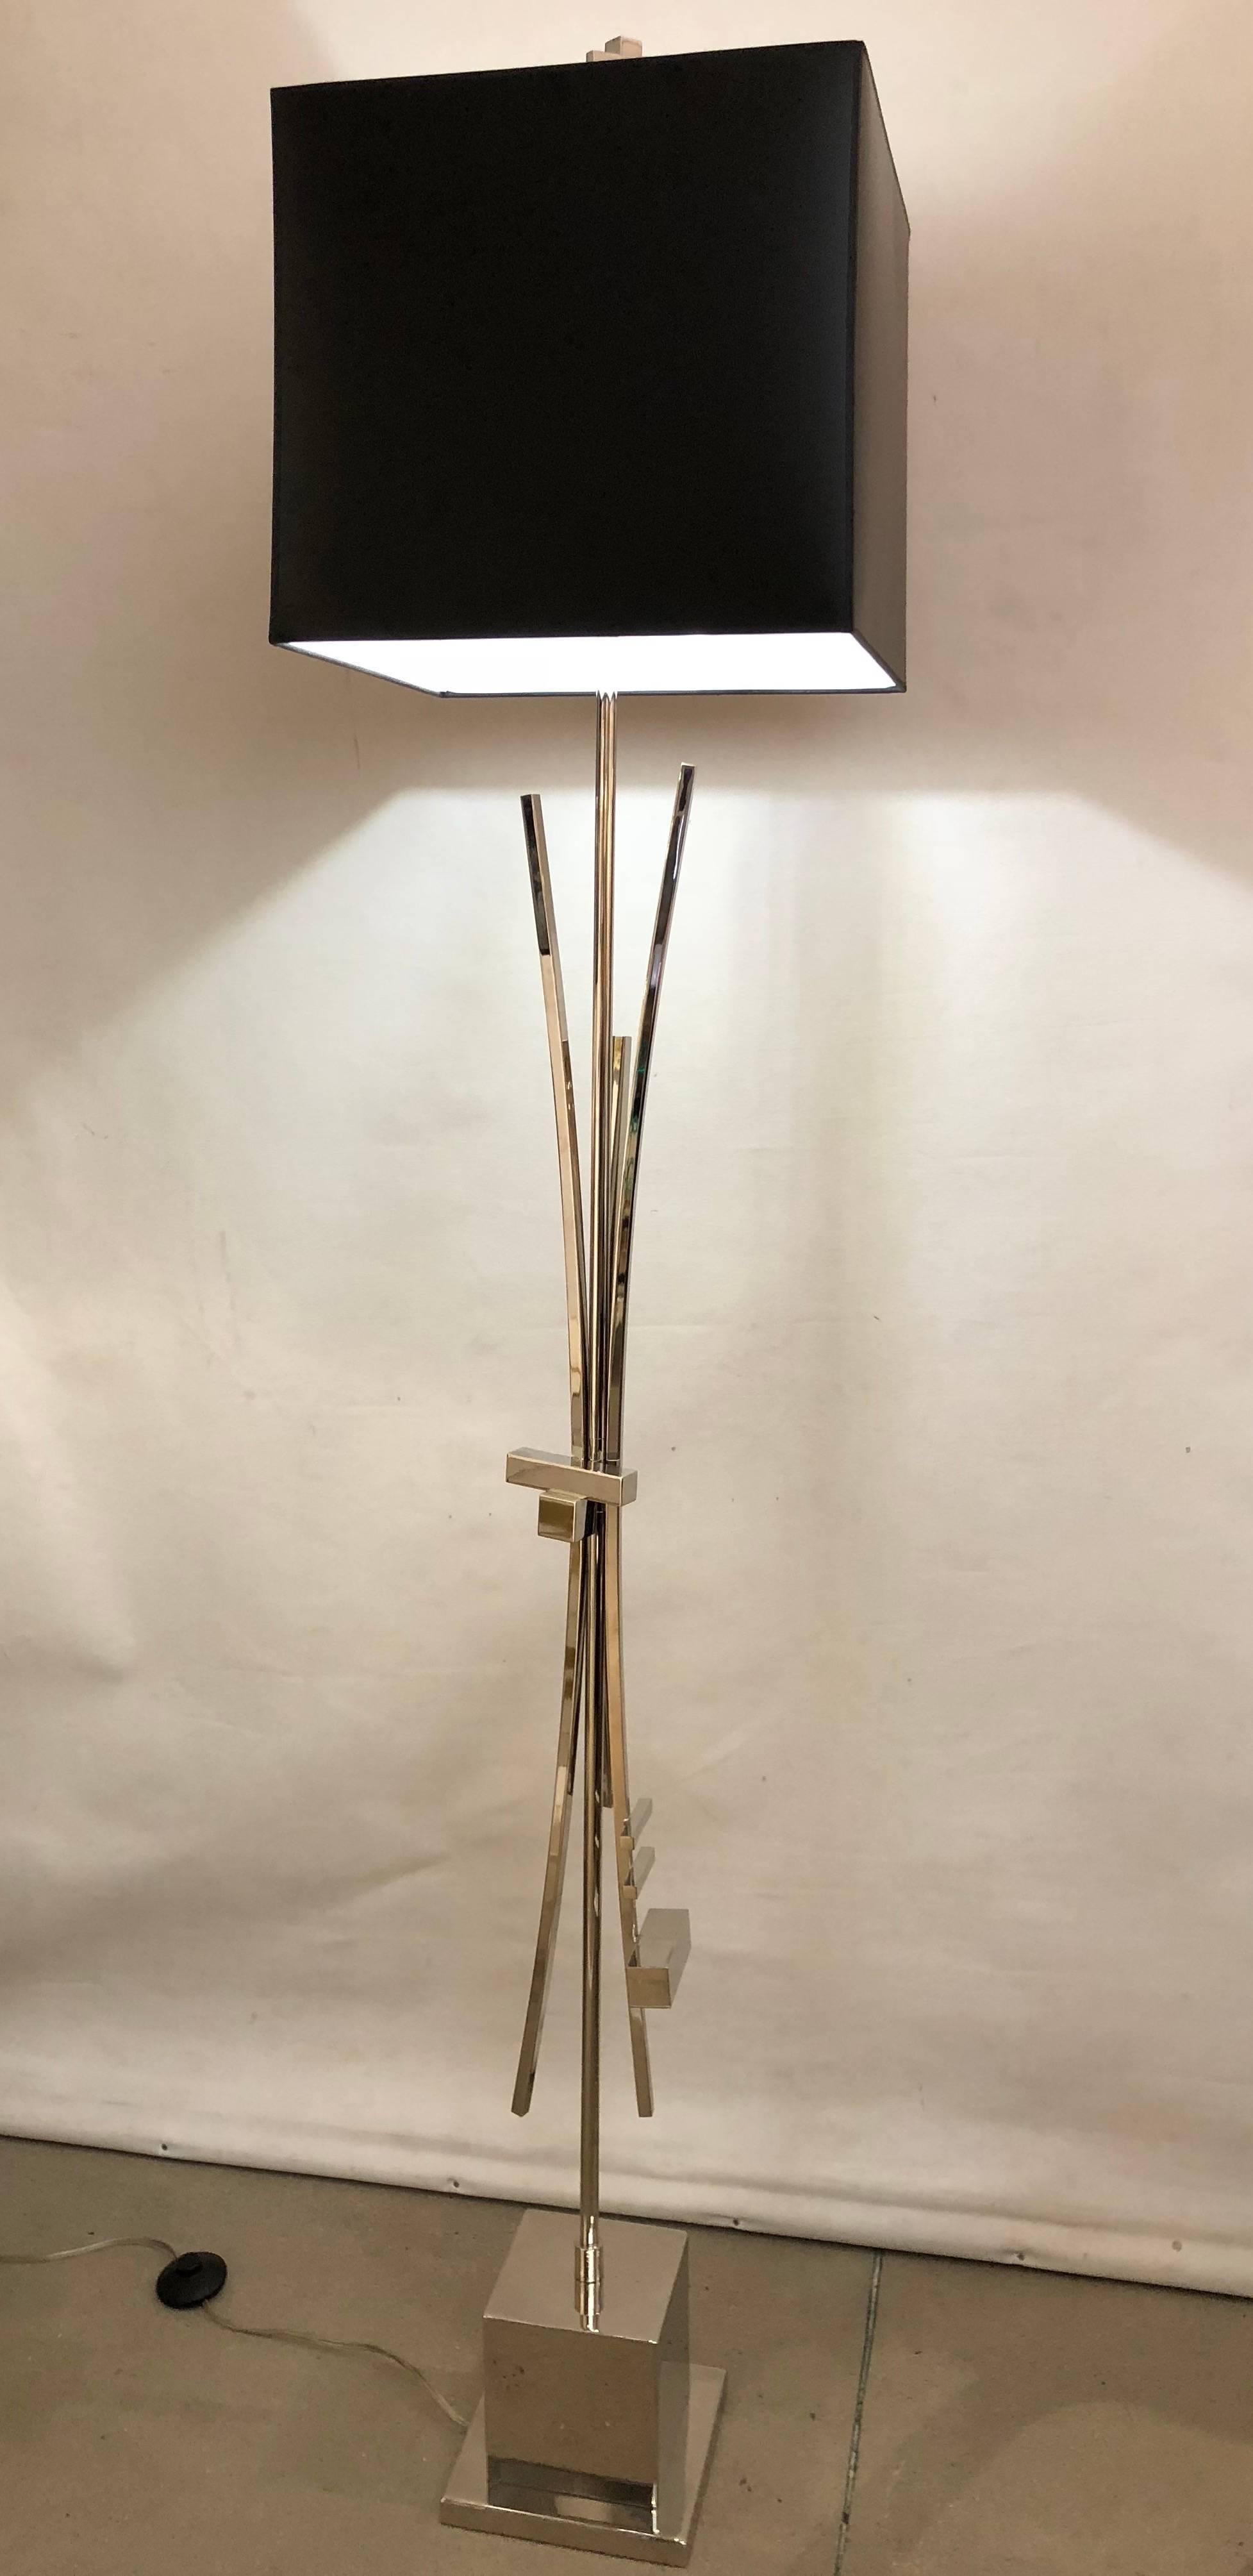 A modern Italian fine design floor lamp, the abstract geometric design with squared metal strips and plates disposed on a central pole supported by a stepped nickel-plated square base. High quality of execution.
Dimensions of base: 8.5 inches x 8.5.